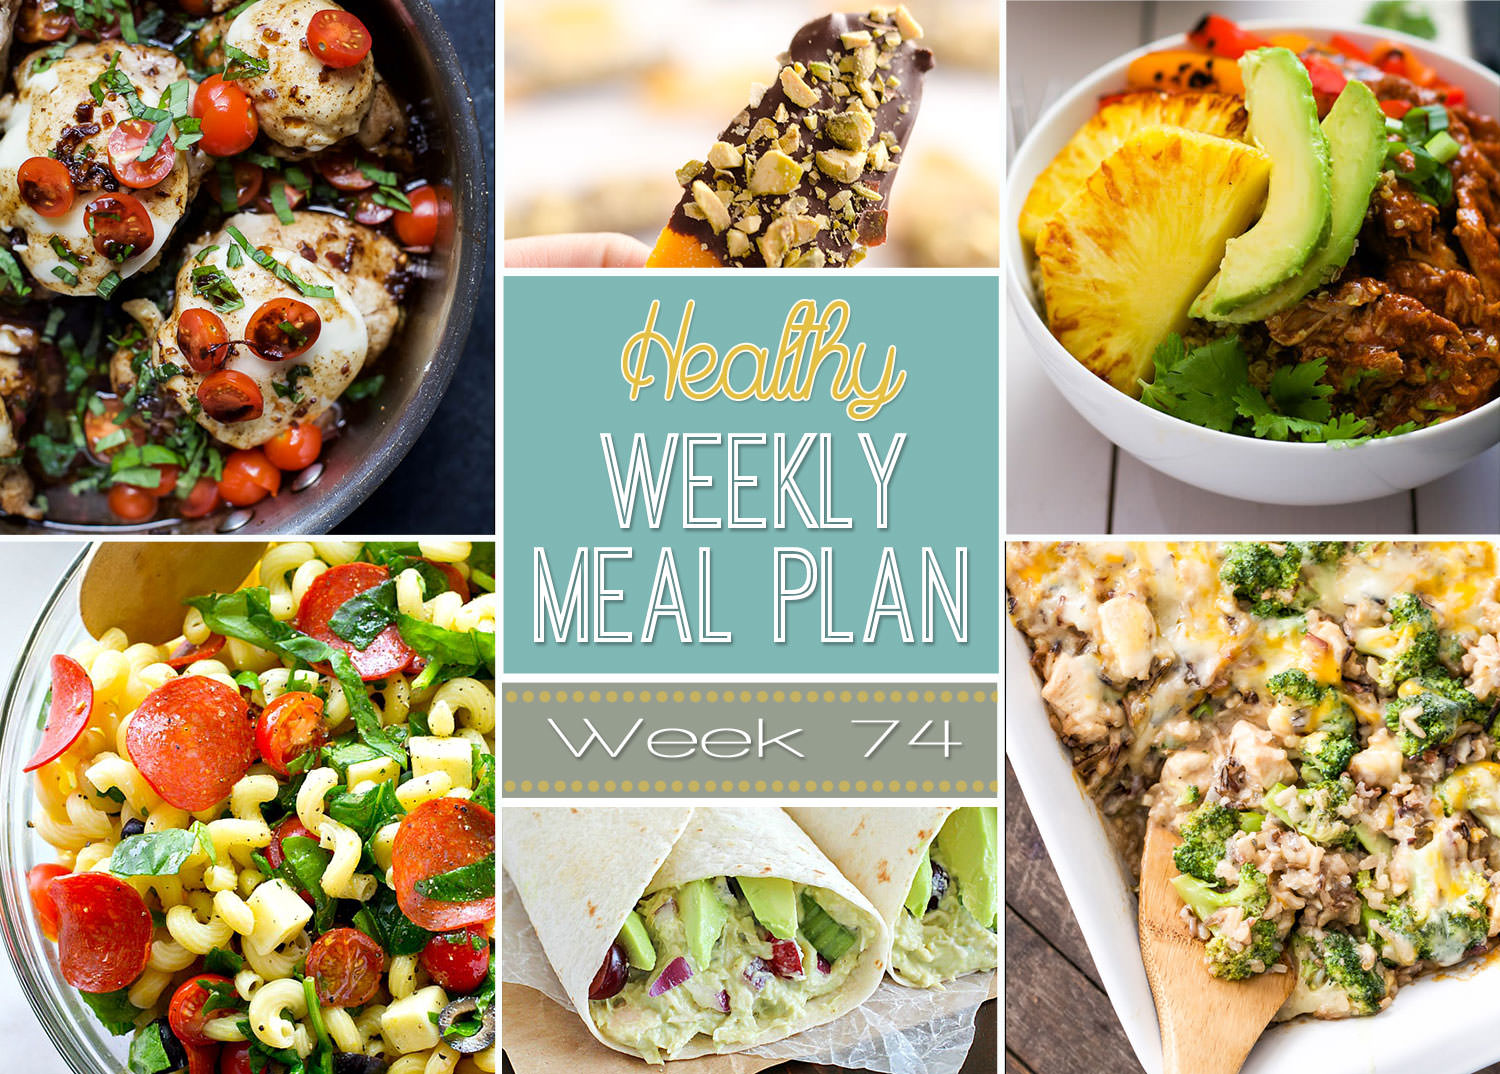 This weeks healthy meal plan is filled with pizza pasta salad, avocado chicken wraps and a delicious apple banana bread! Plus a sparkling Lemon Drop for New Years Eve!